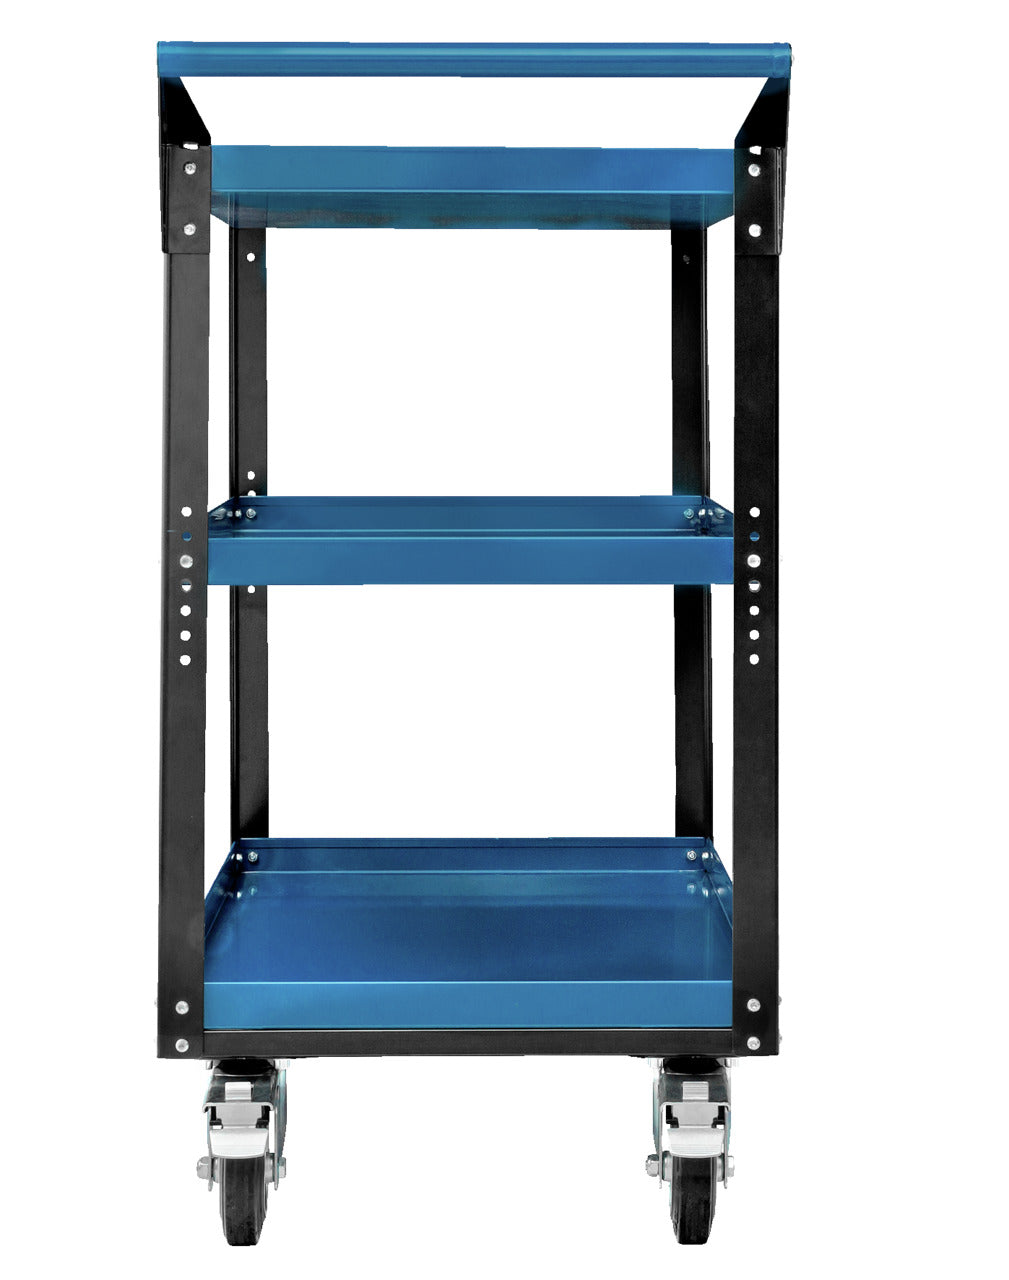 GEDORE 1530 - Tray trolley (3437507)